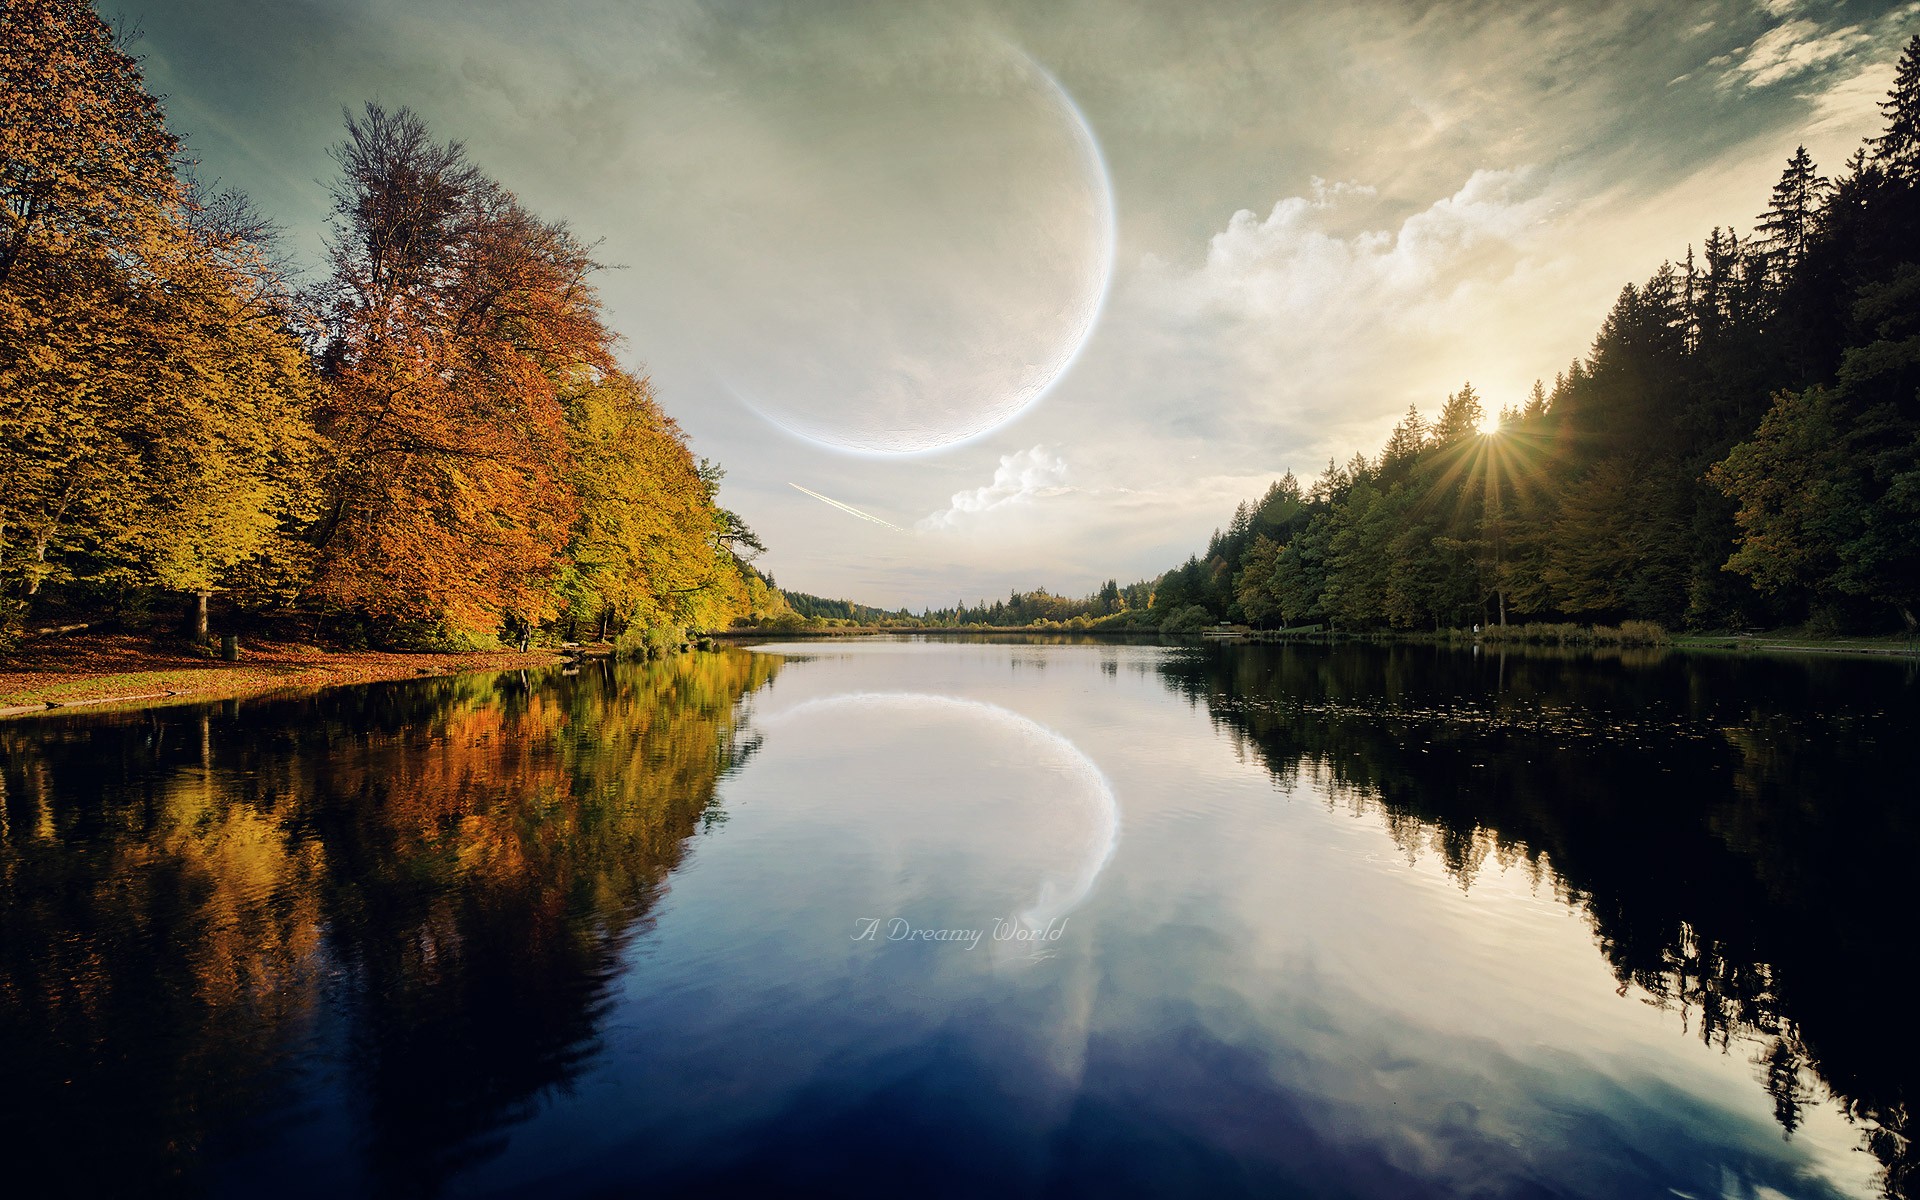 trees, Planets, Moon, Digital, Art, Science, Fiction, Dreamy, Rivers, Reflections Wallpaper